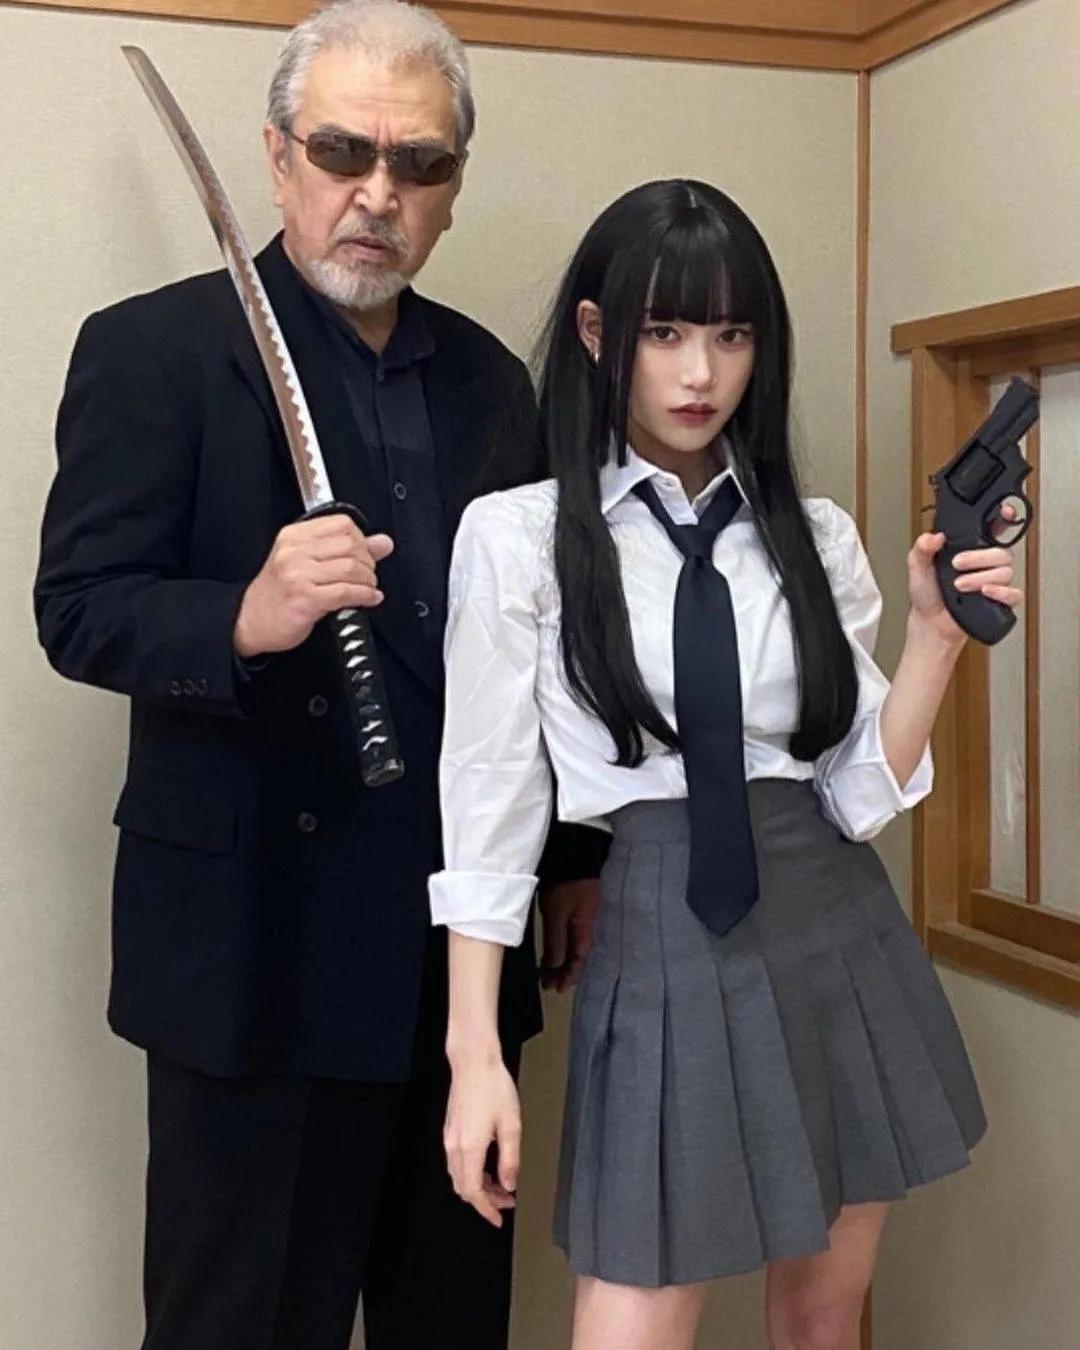 The Japanese father-daughter Cosplay